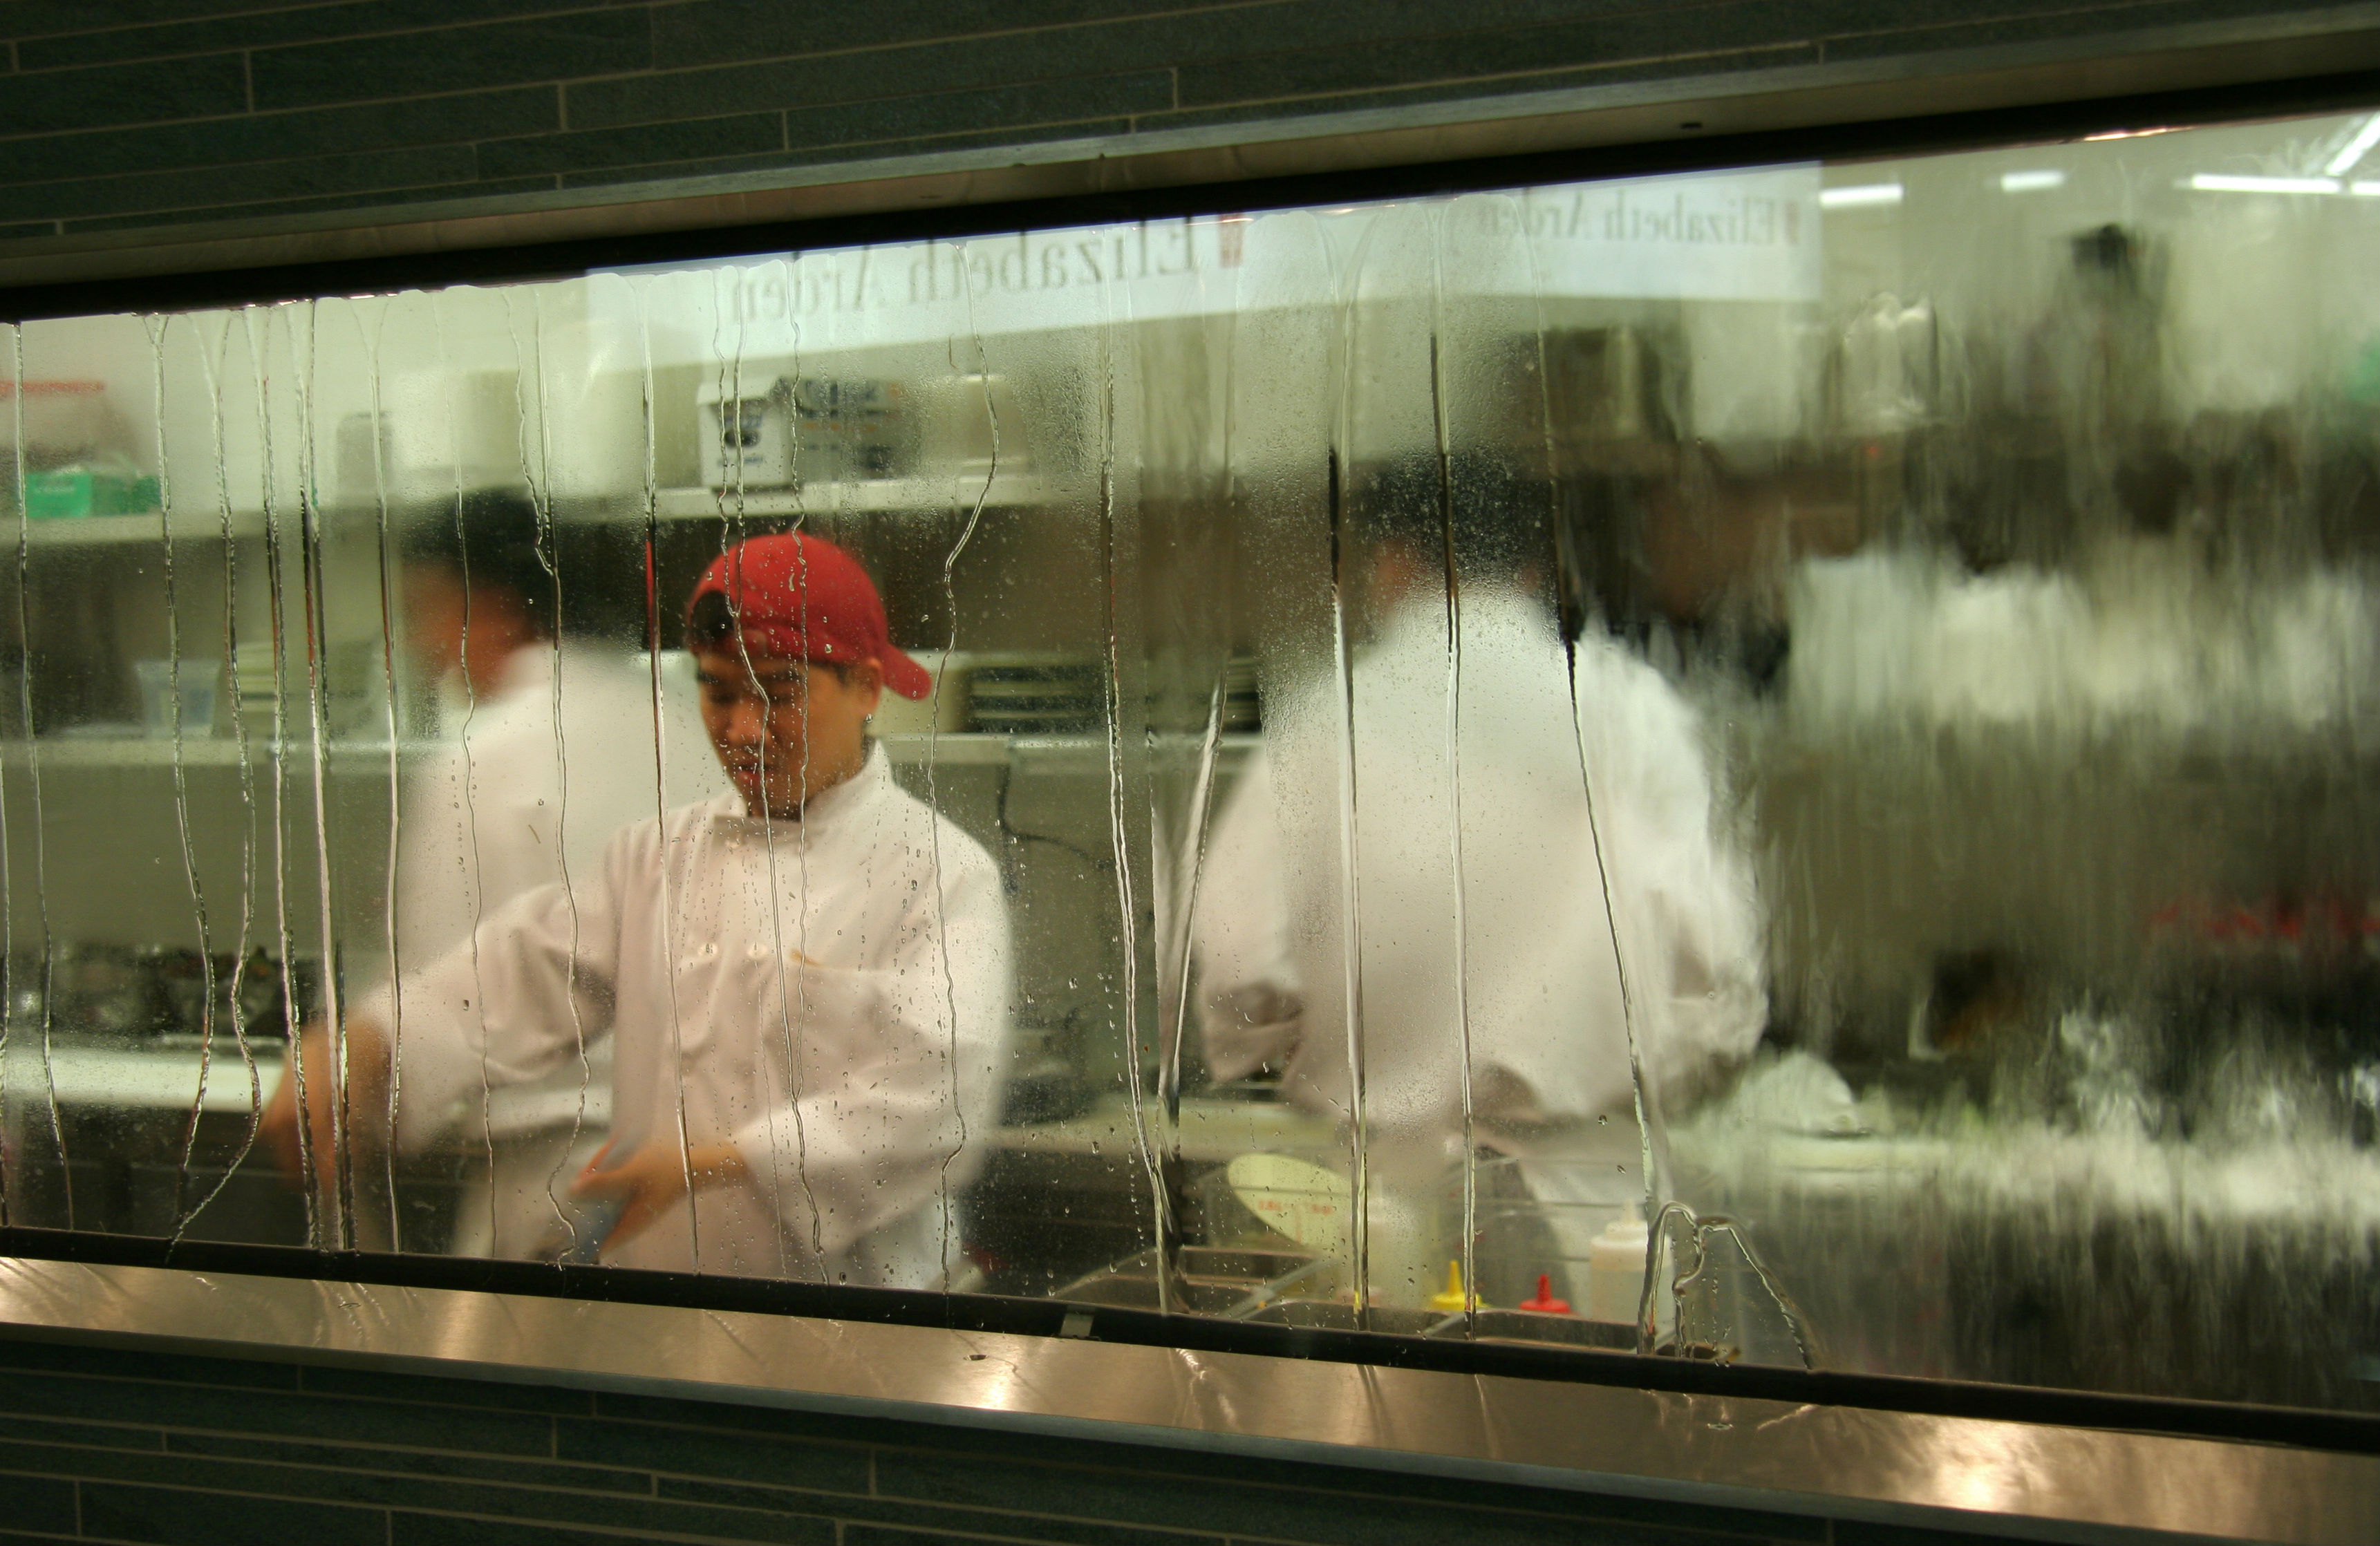 Nearly 1 in 3 Restaurant Workers Suffers From Food Insecurity